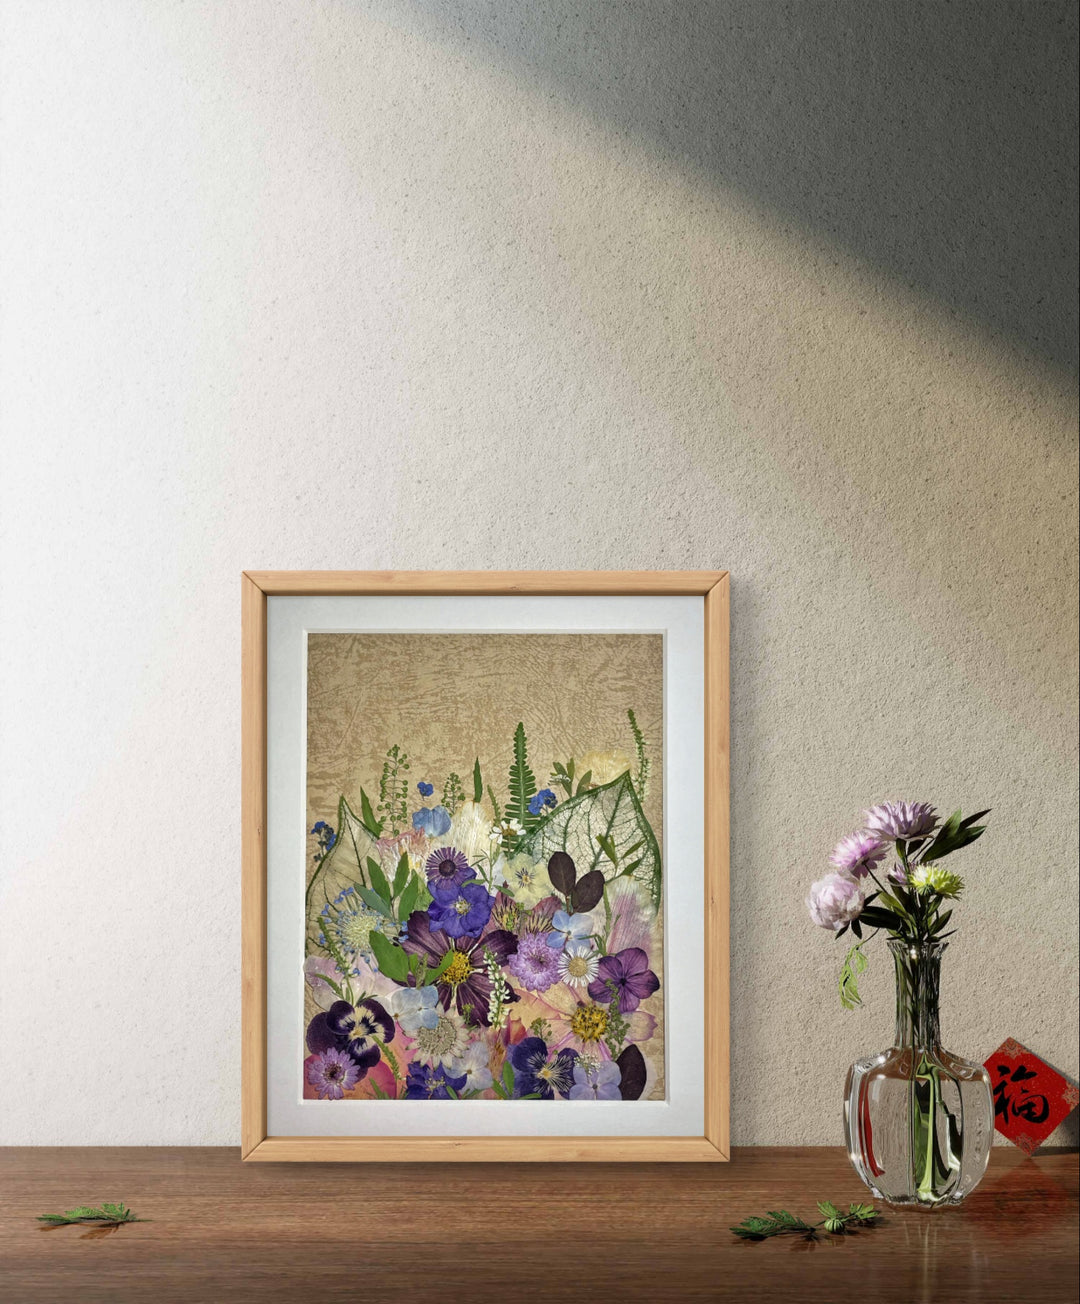 8.8 inches width 11 inches height pressed flower frame that presents vibrant spring stands on the wood table.